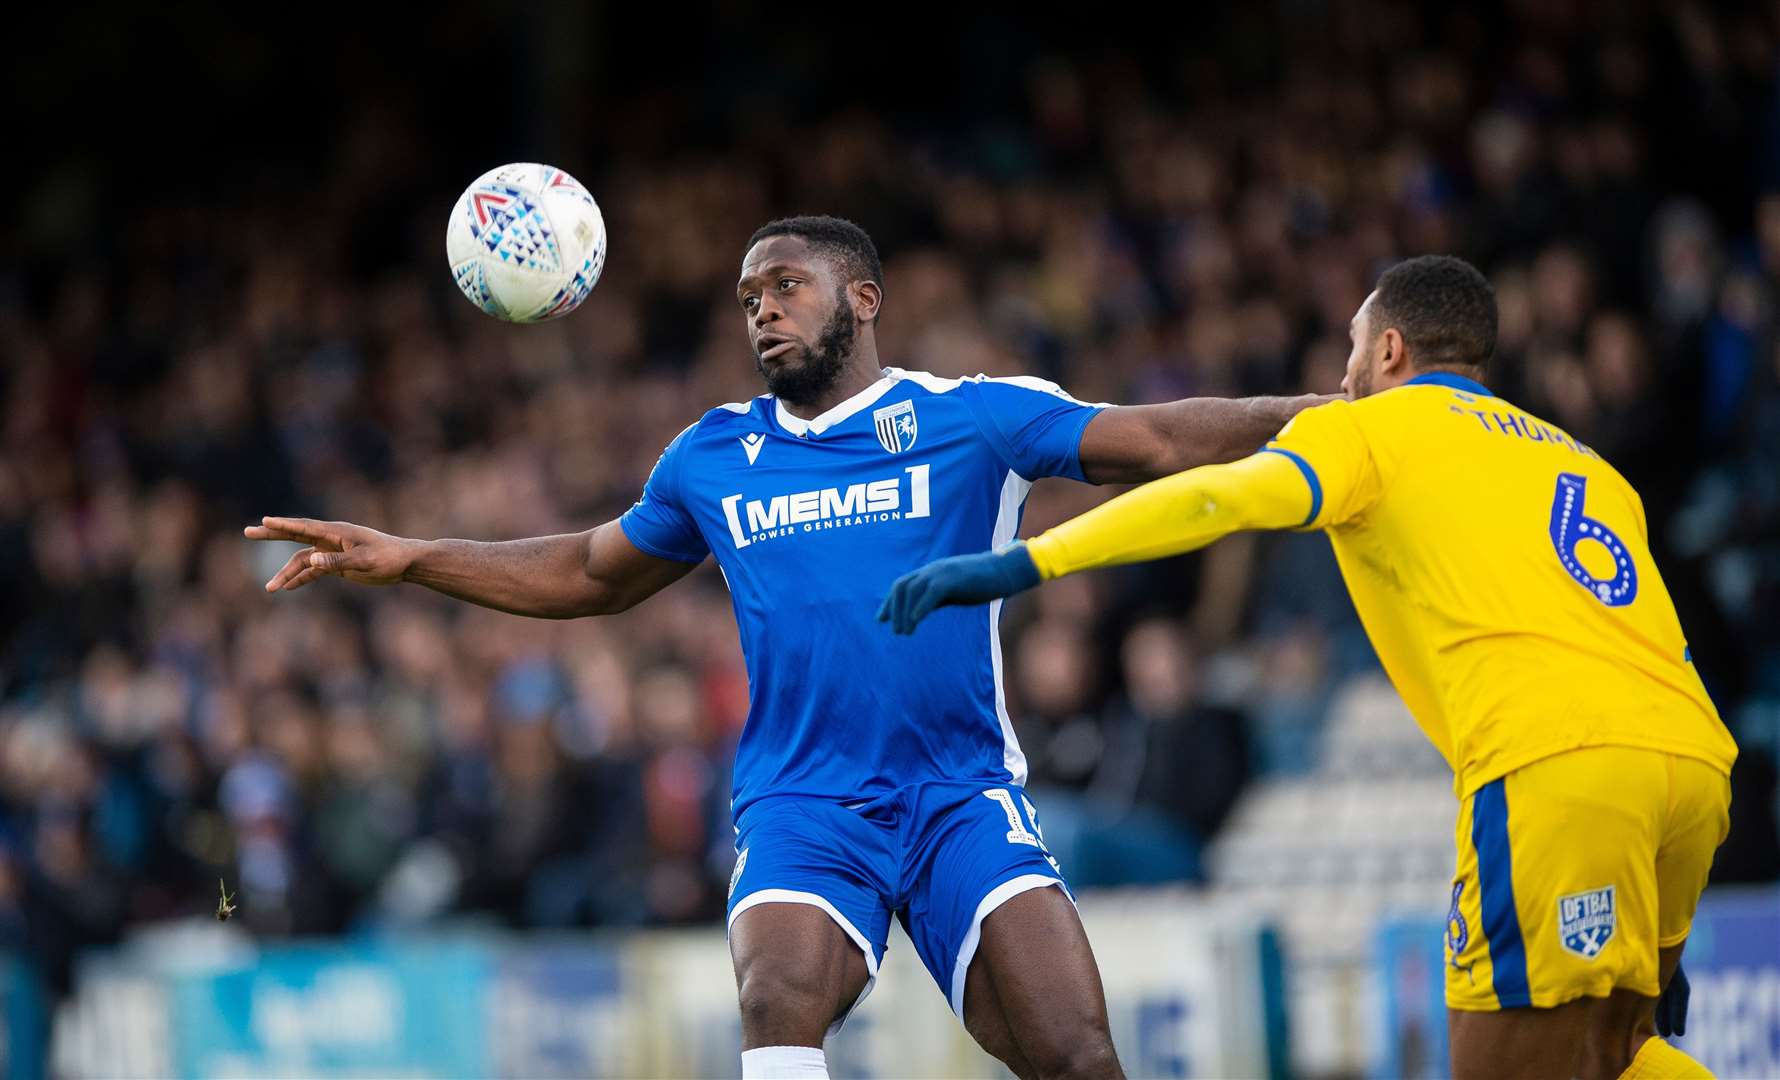 Gillingham hoping to see the best of John Akinde